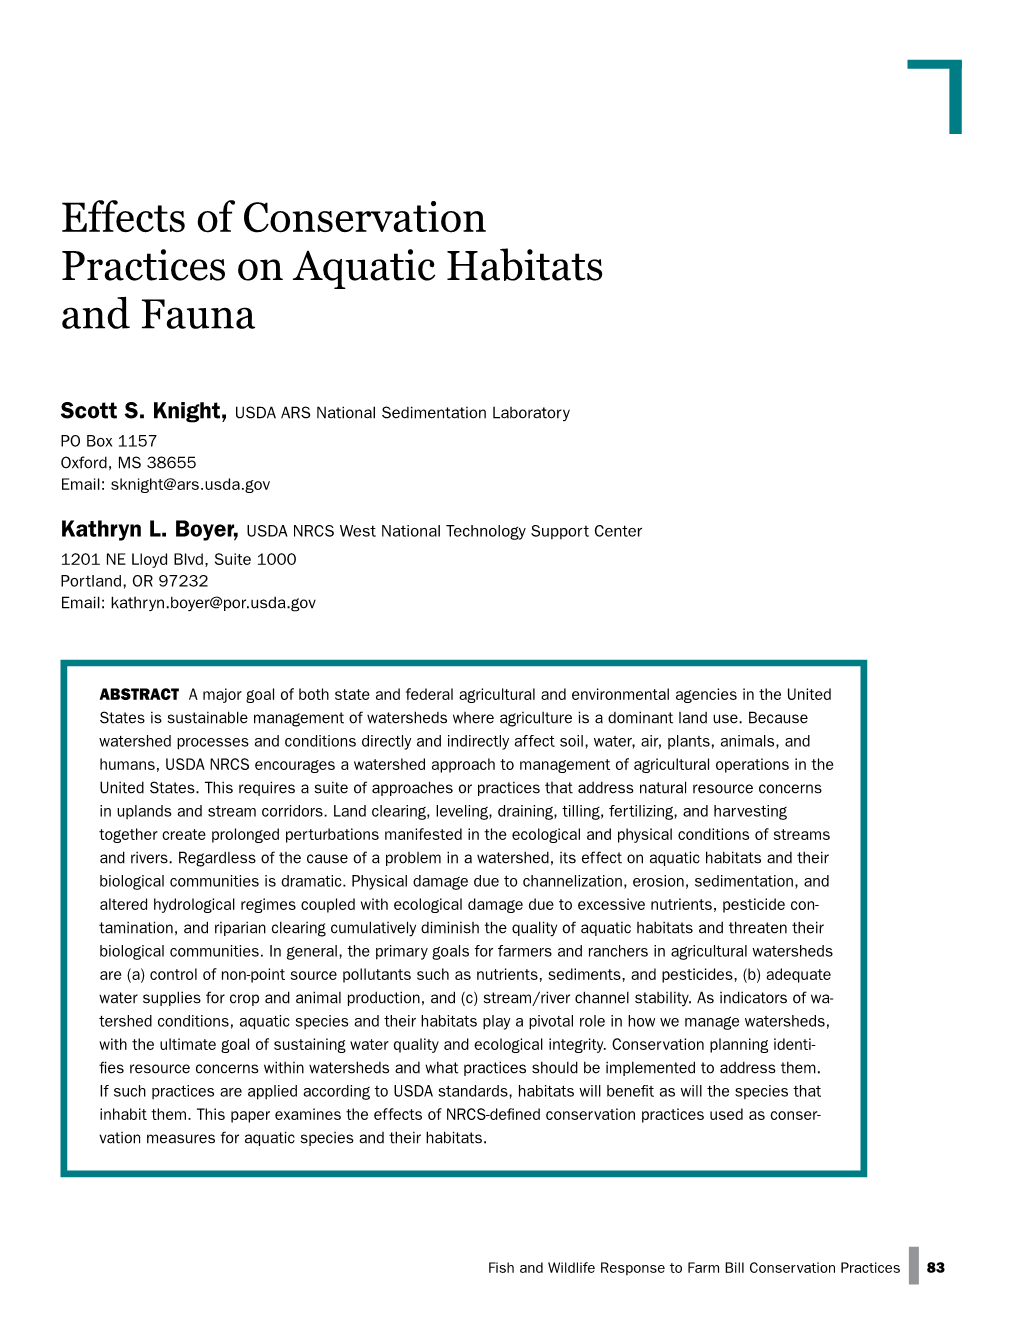 Effects of Conservation Practices on Aquatic Habitats and Fauna